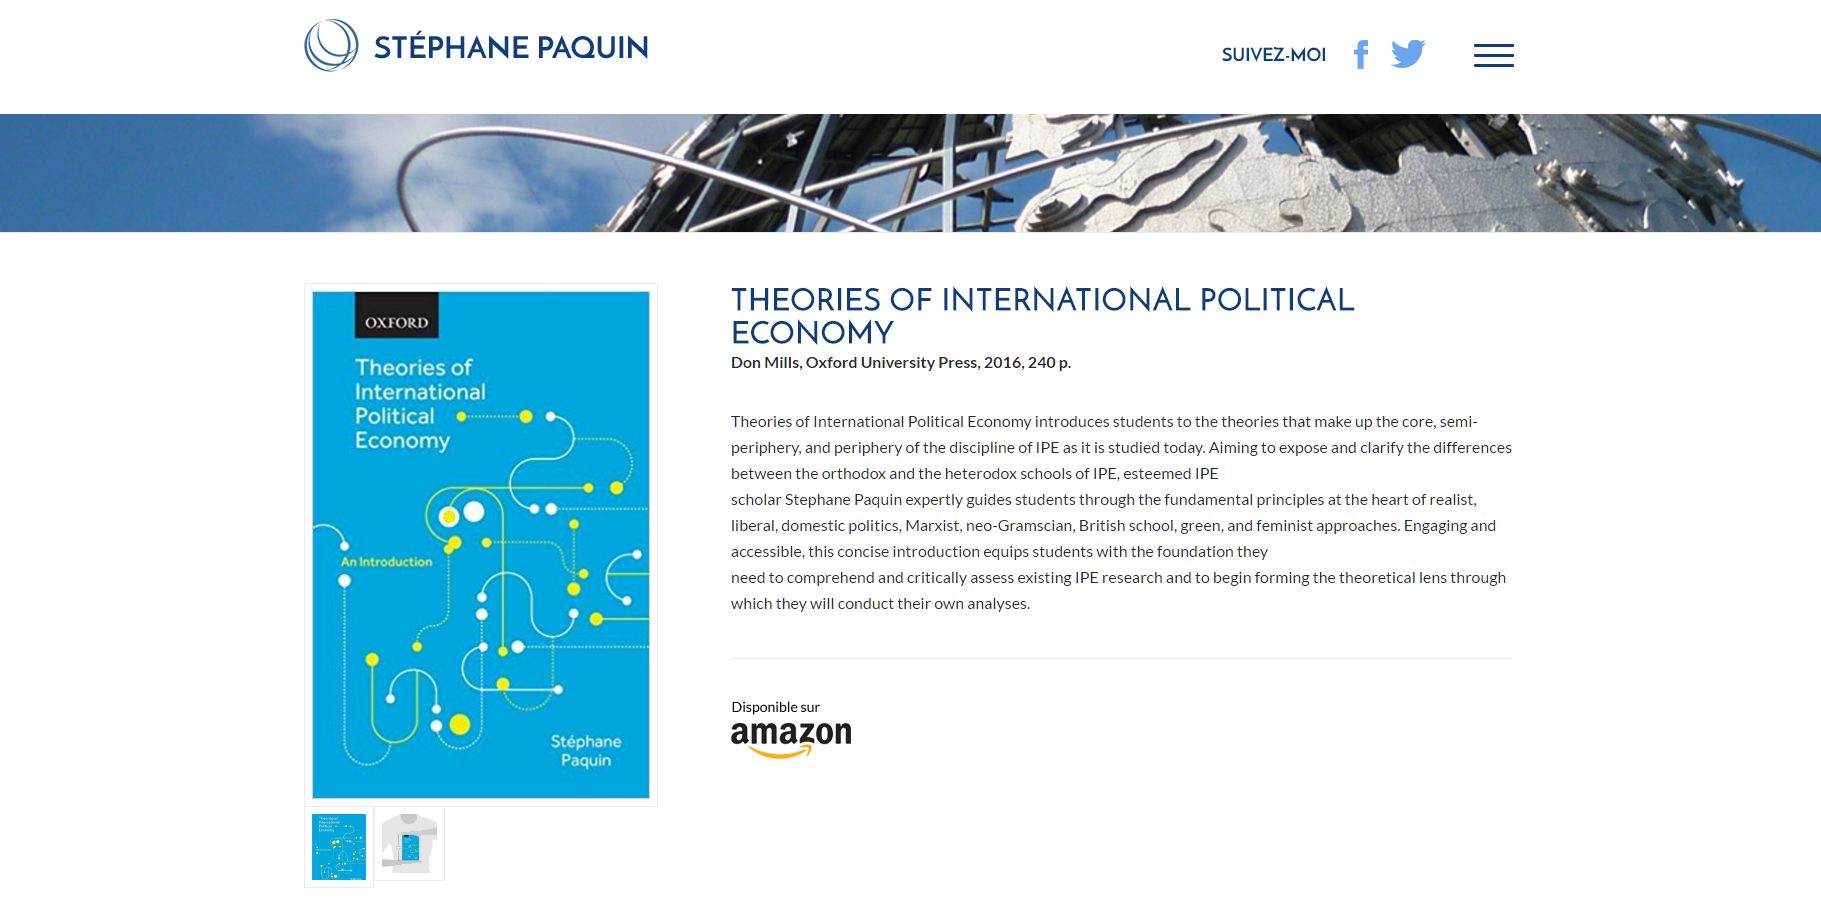 Stéphane Paquin’s publications available on Amazon - Website by Appwapp